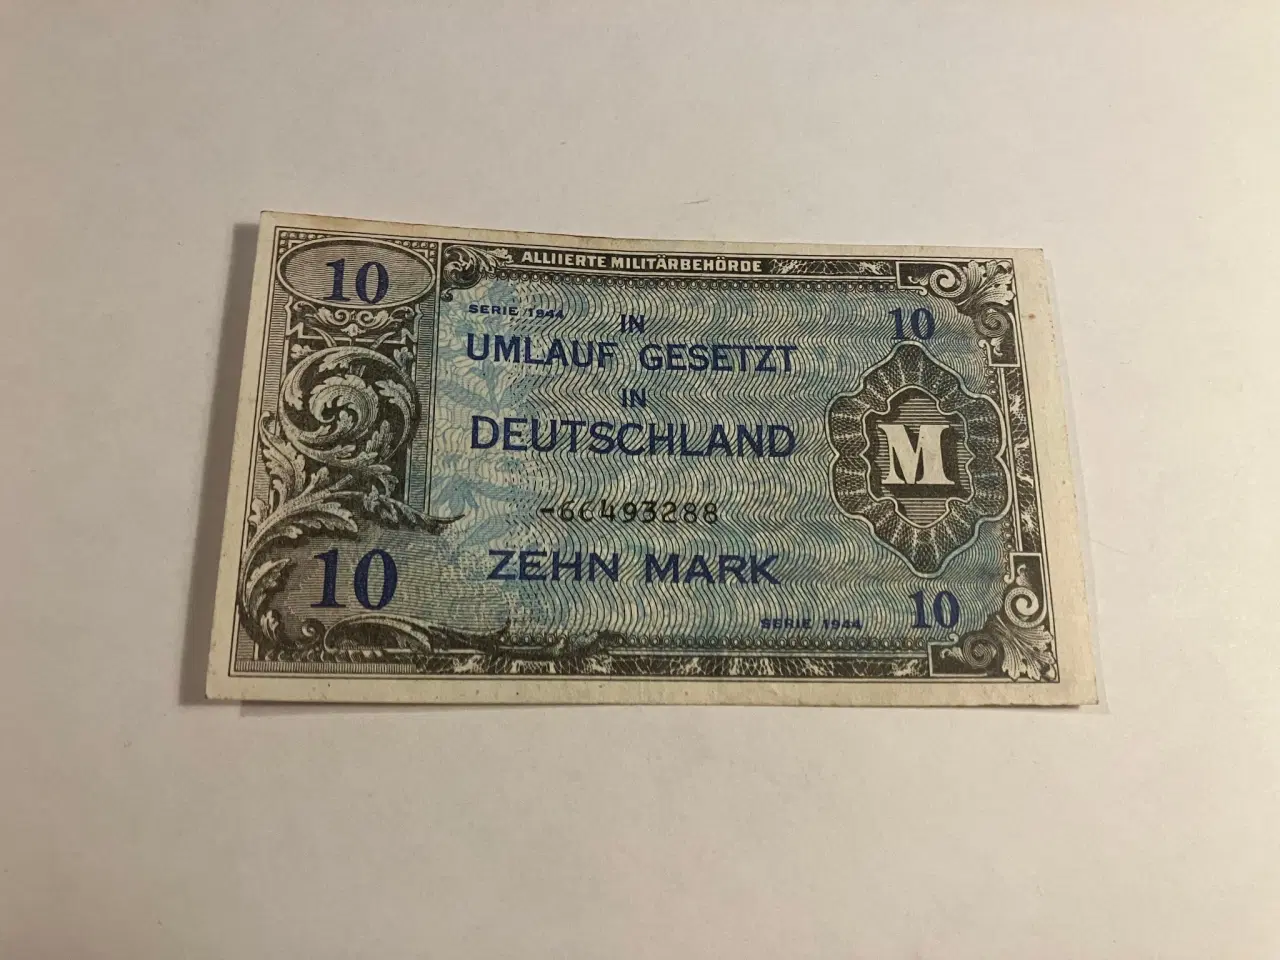 Billede 1 - 10 Mark Germany Allied Military Currency 1944